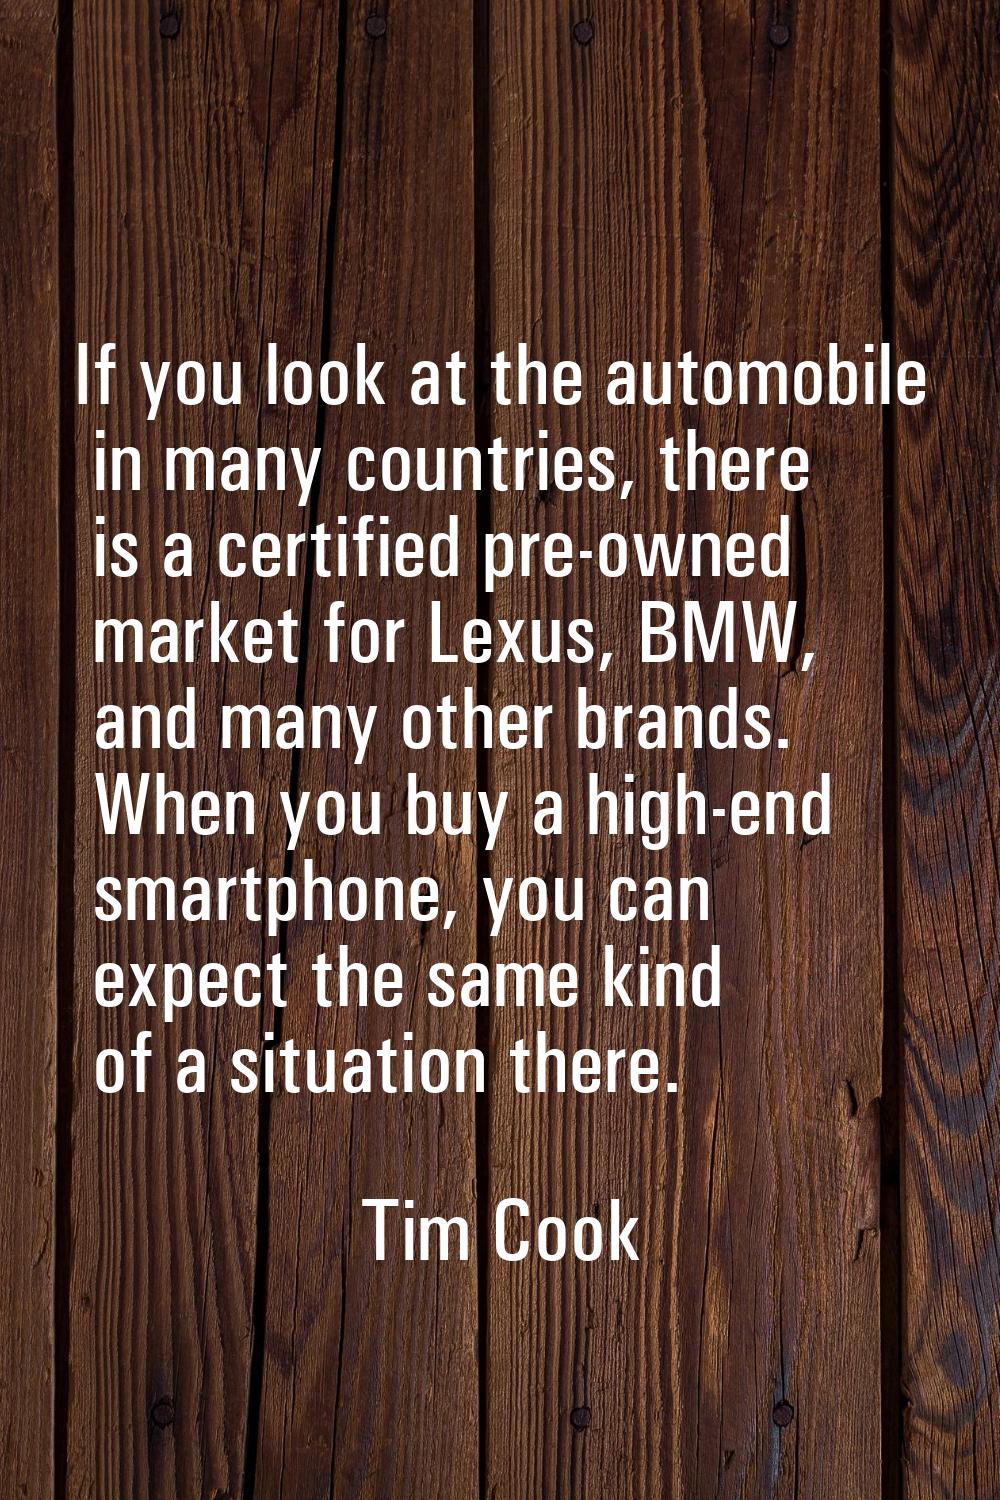 If you look at the automobile in many countries, there is a certified pre-owned market for Lexus, B